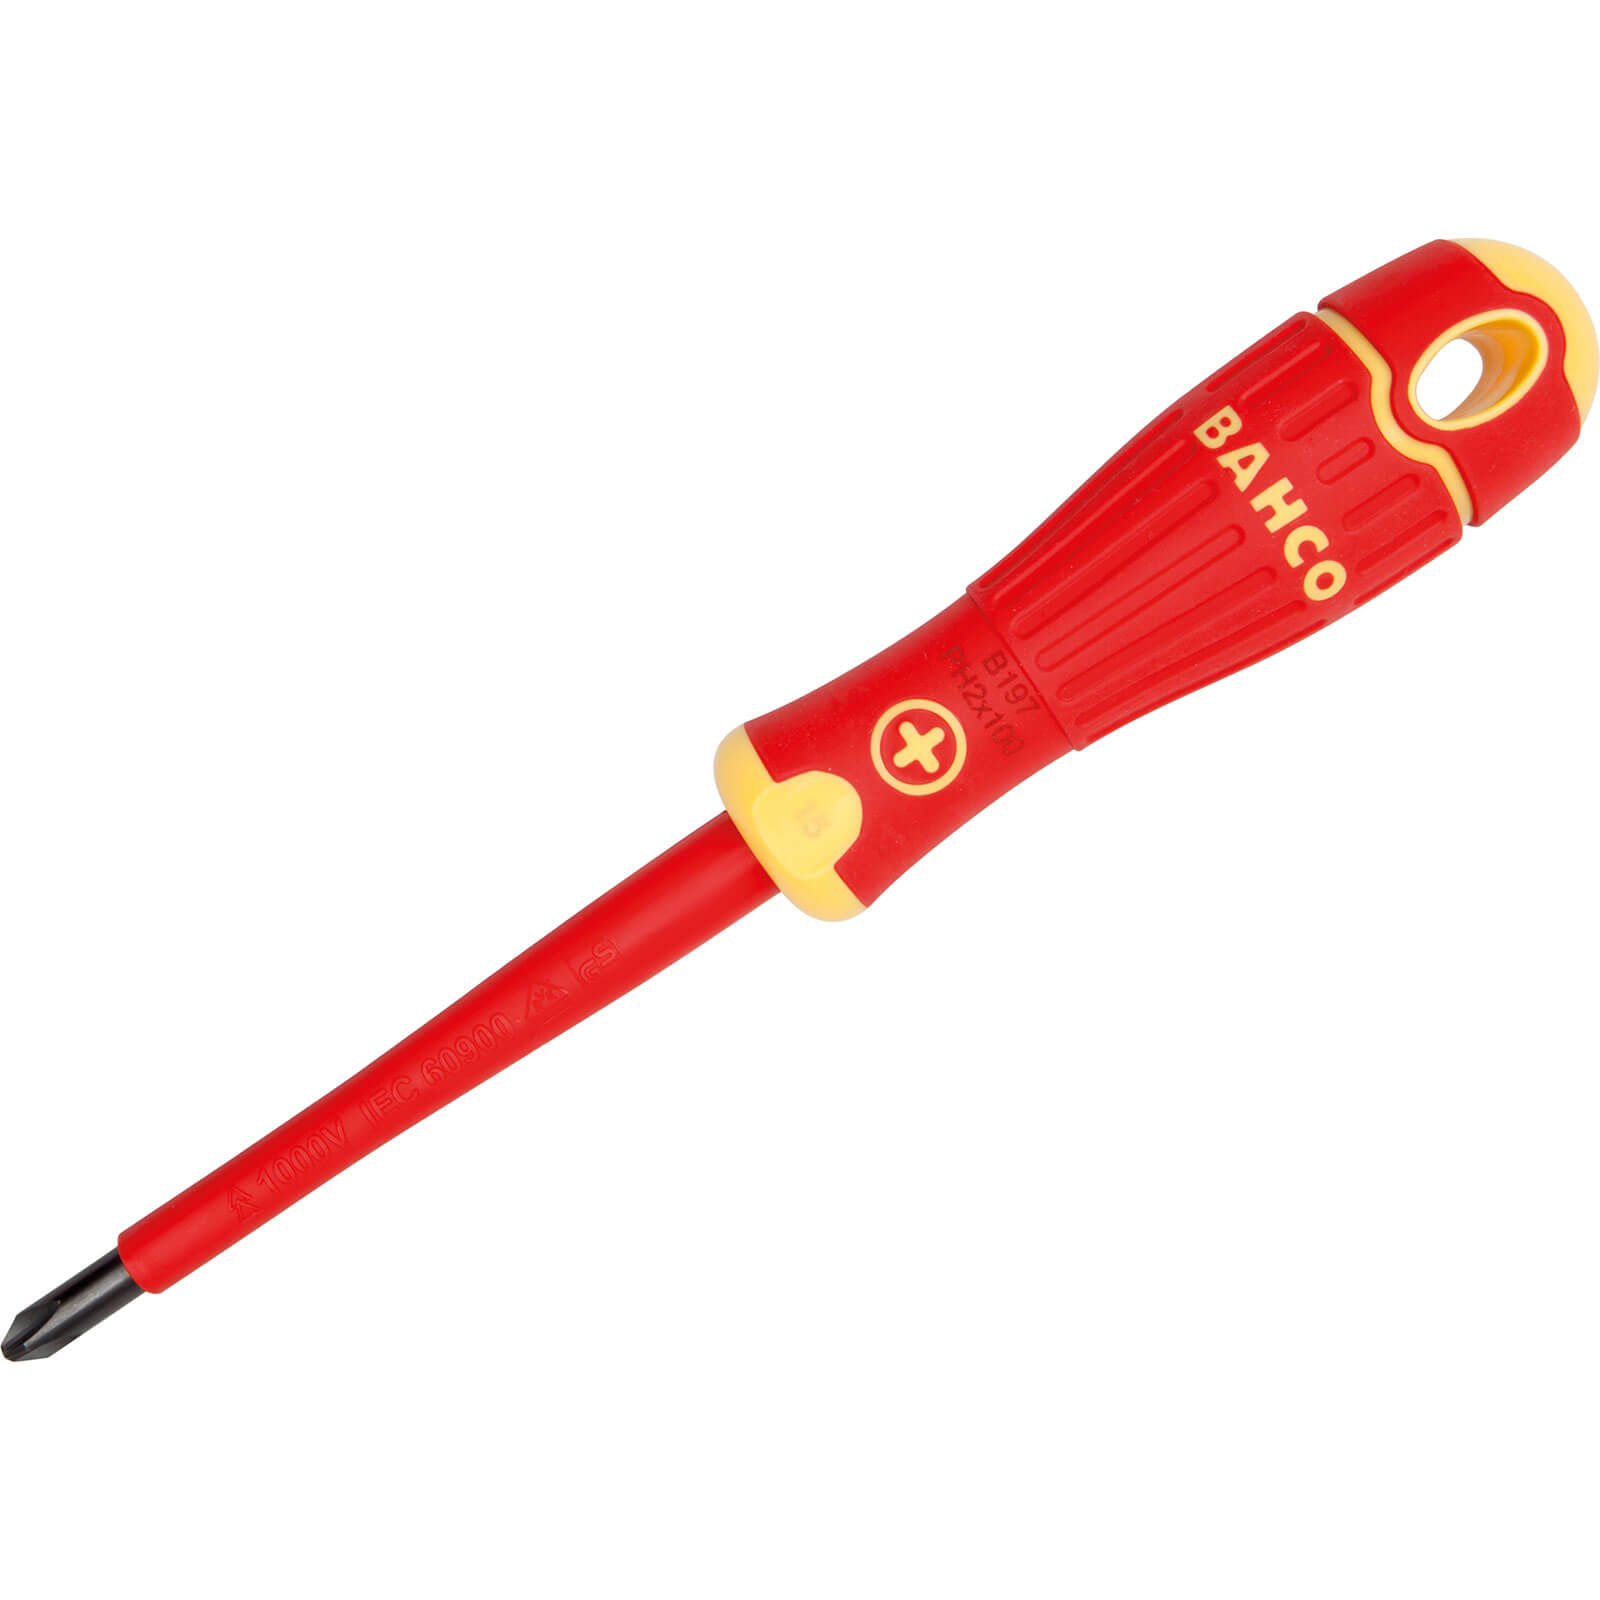 Photo of Bahco Vde Insulated Phillips Screwdriver Ph0 75mm